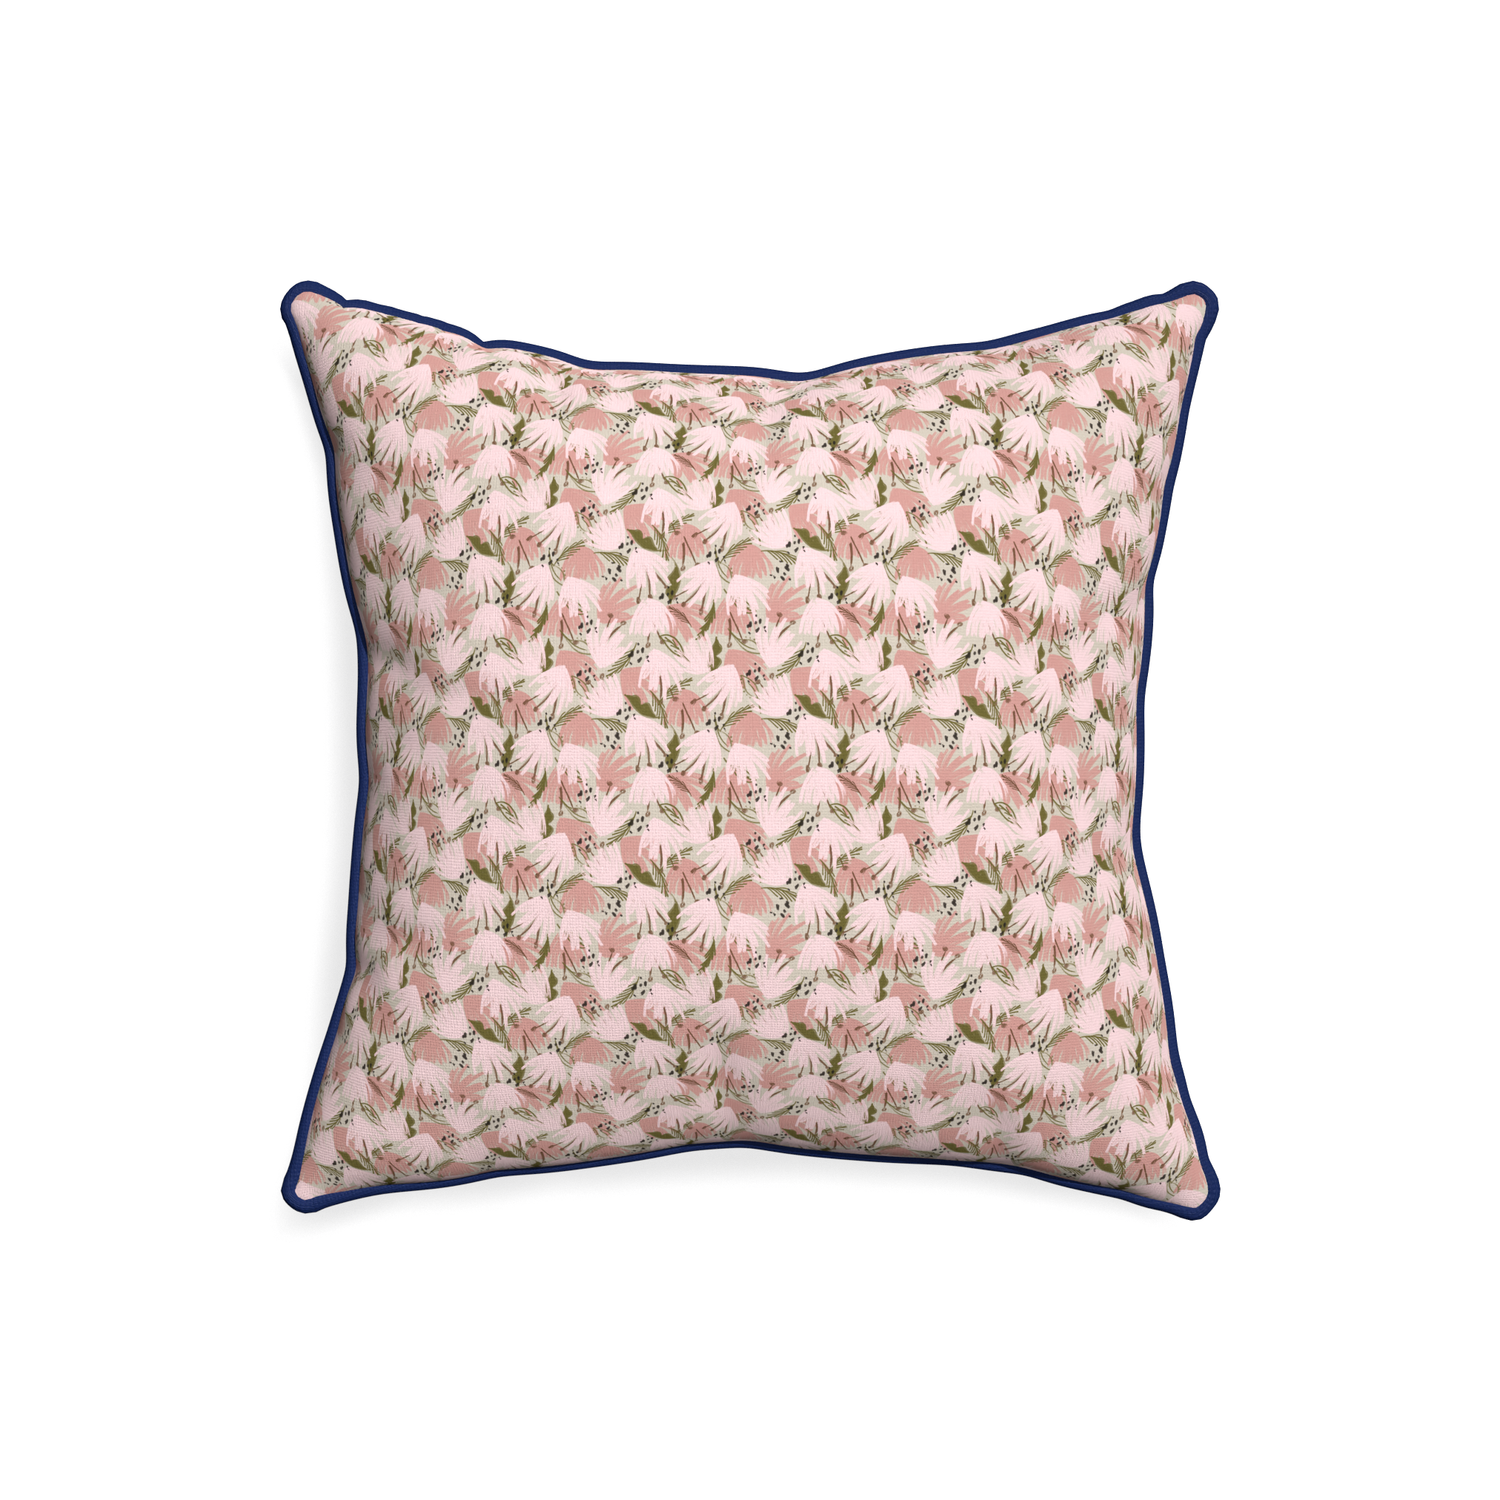 20-square eden pink custom pillow with midnight piping on white background